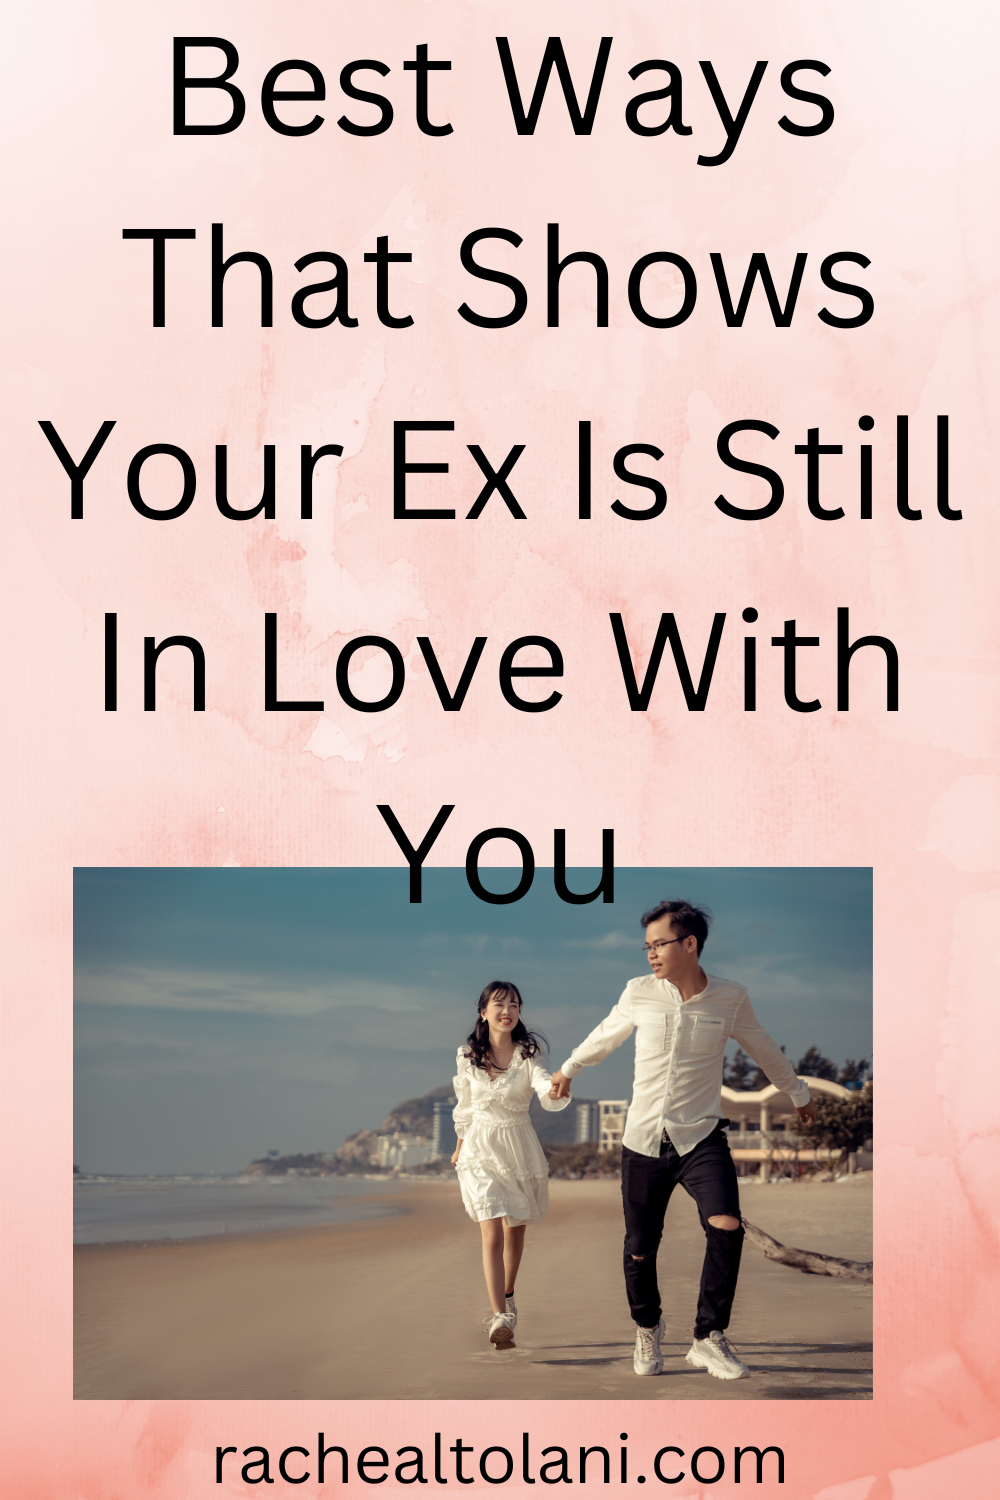 Signs that your ex still loves you